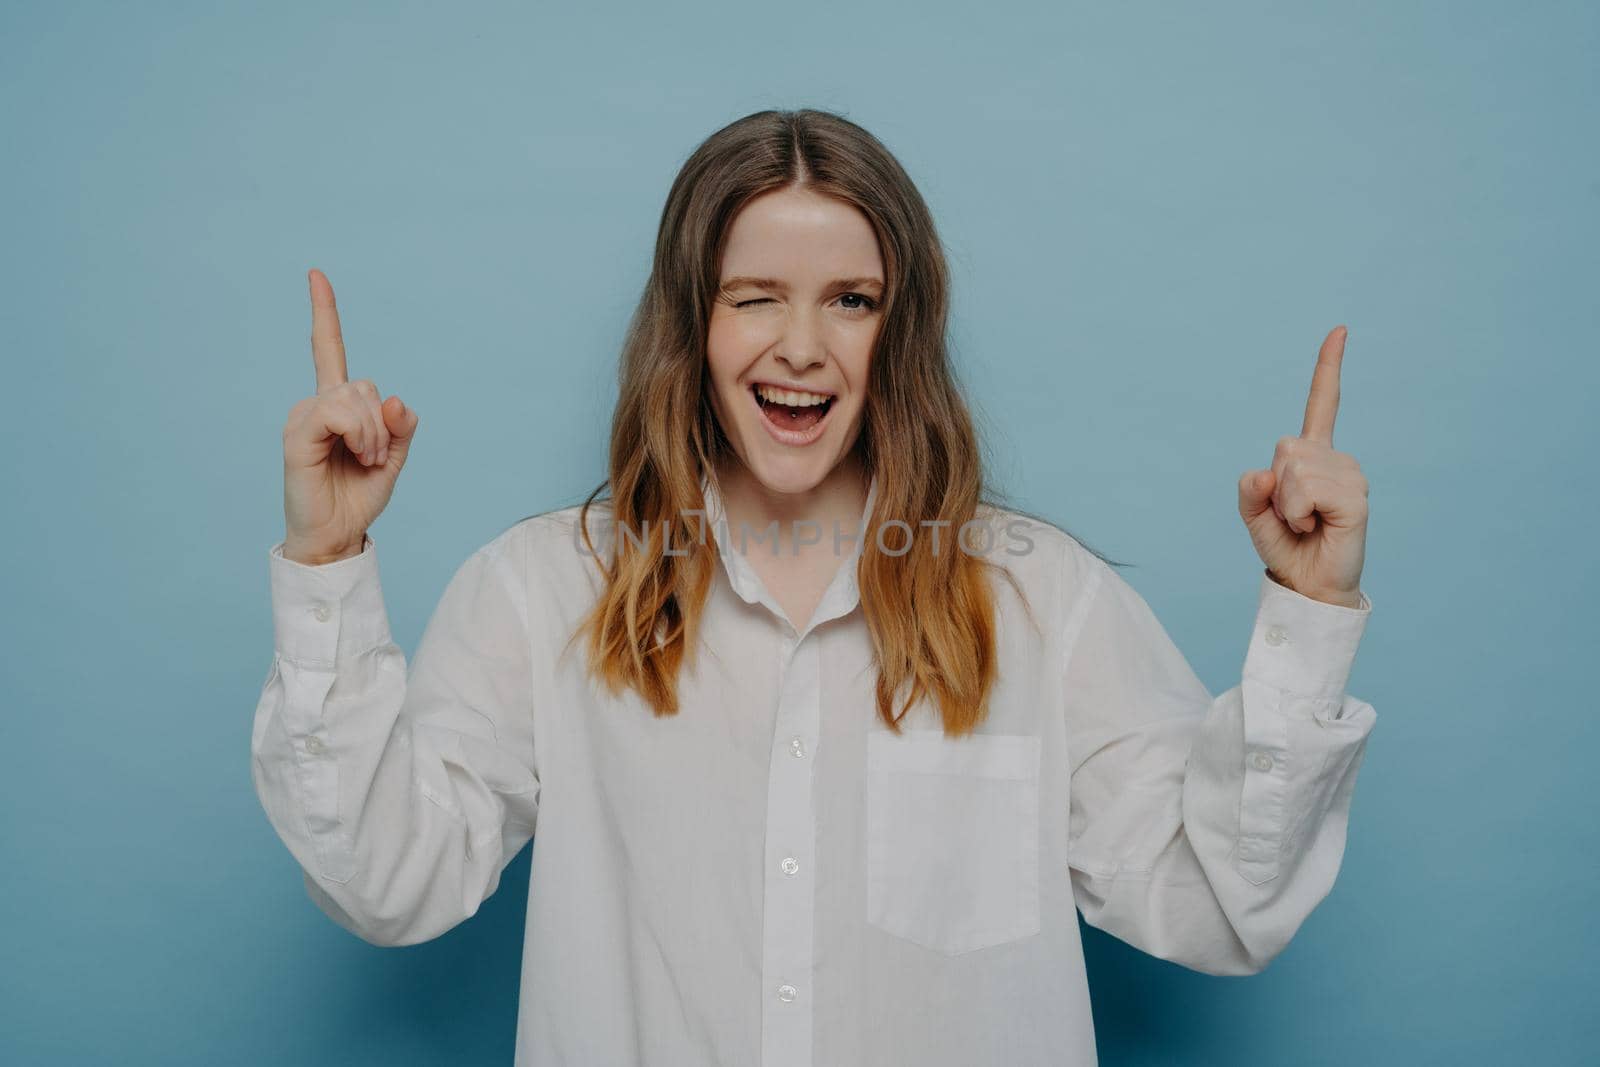 Look here. Happy teenage girl with wide smile in white shirt winking and pointing upwards with her fingers, standing isolated on blue wall. Advertisement concept